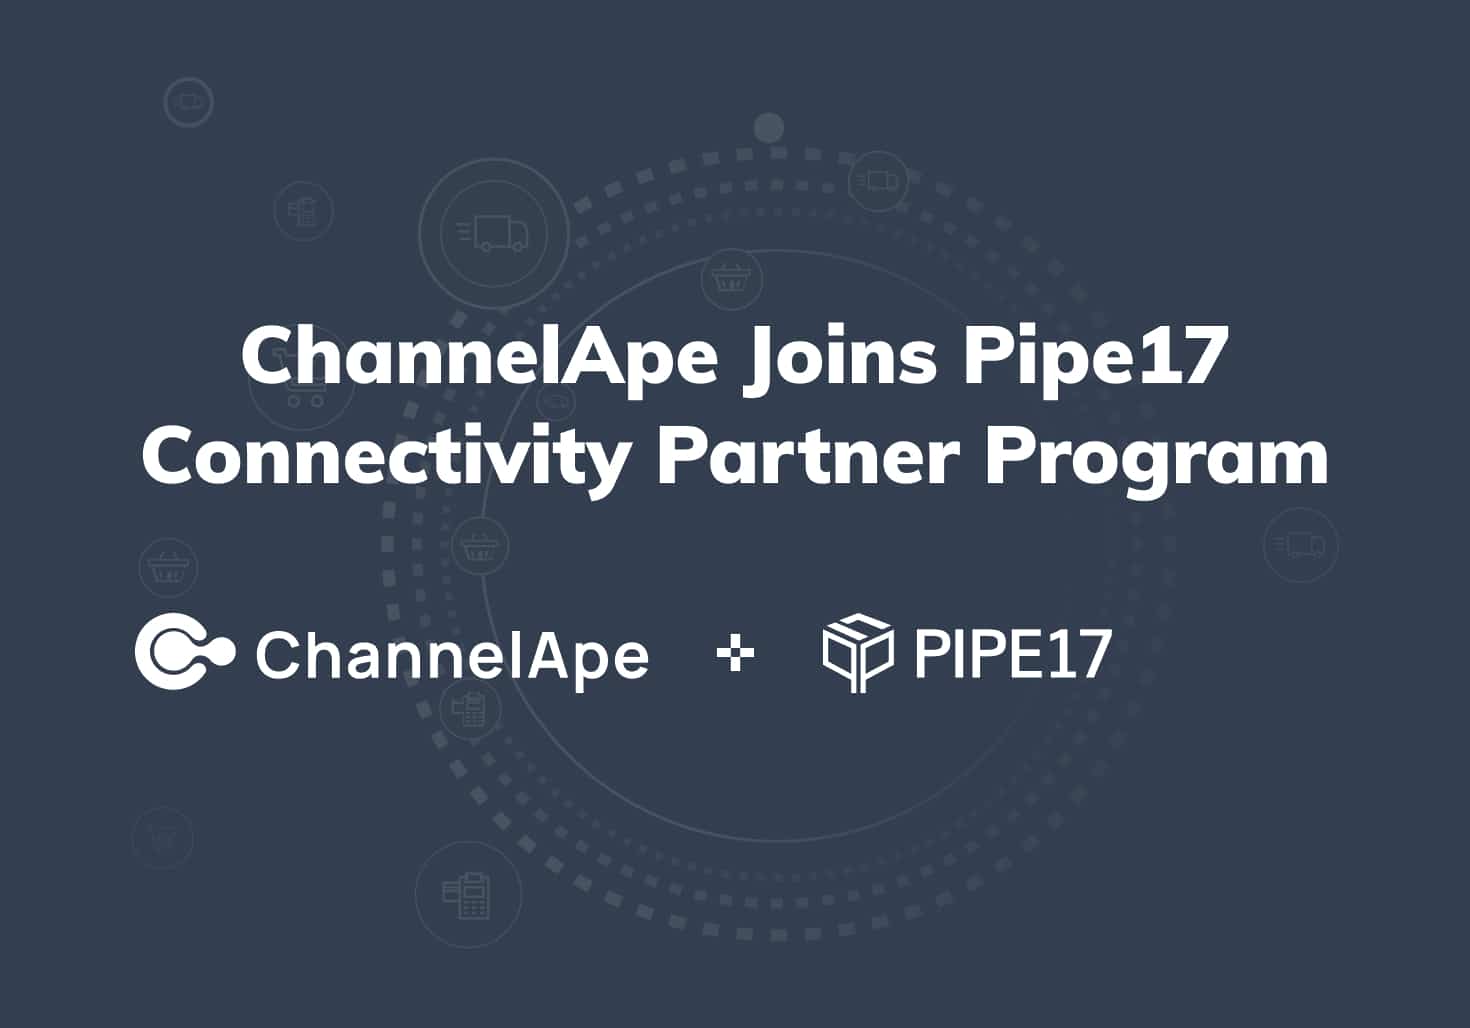 Channel Ape joins Pipe17